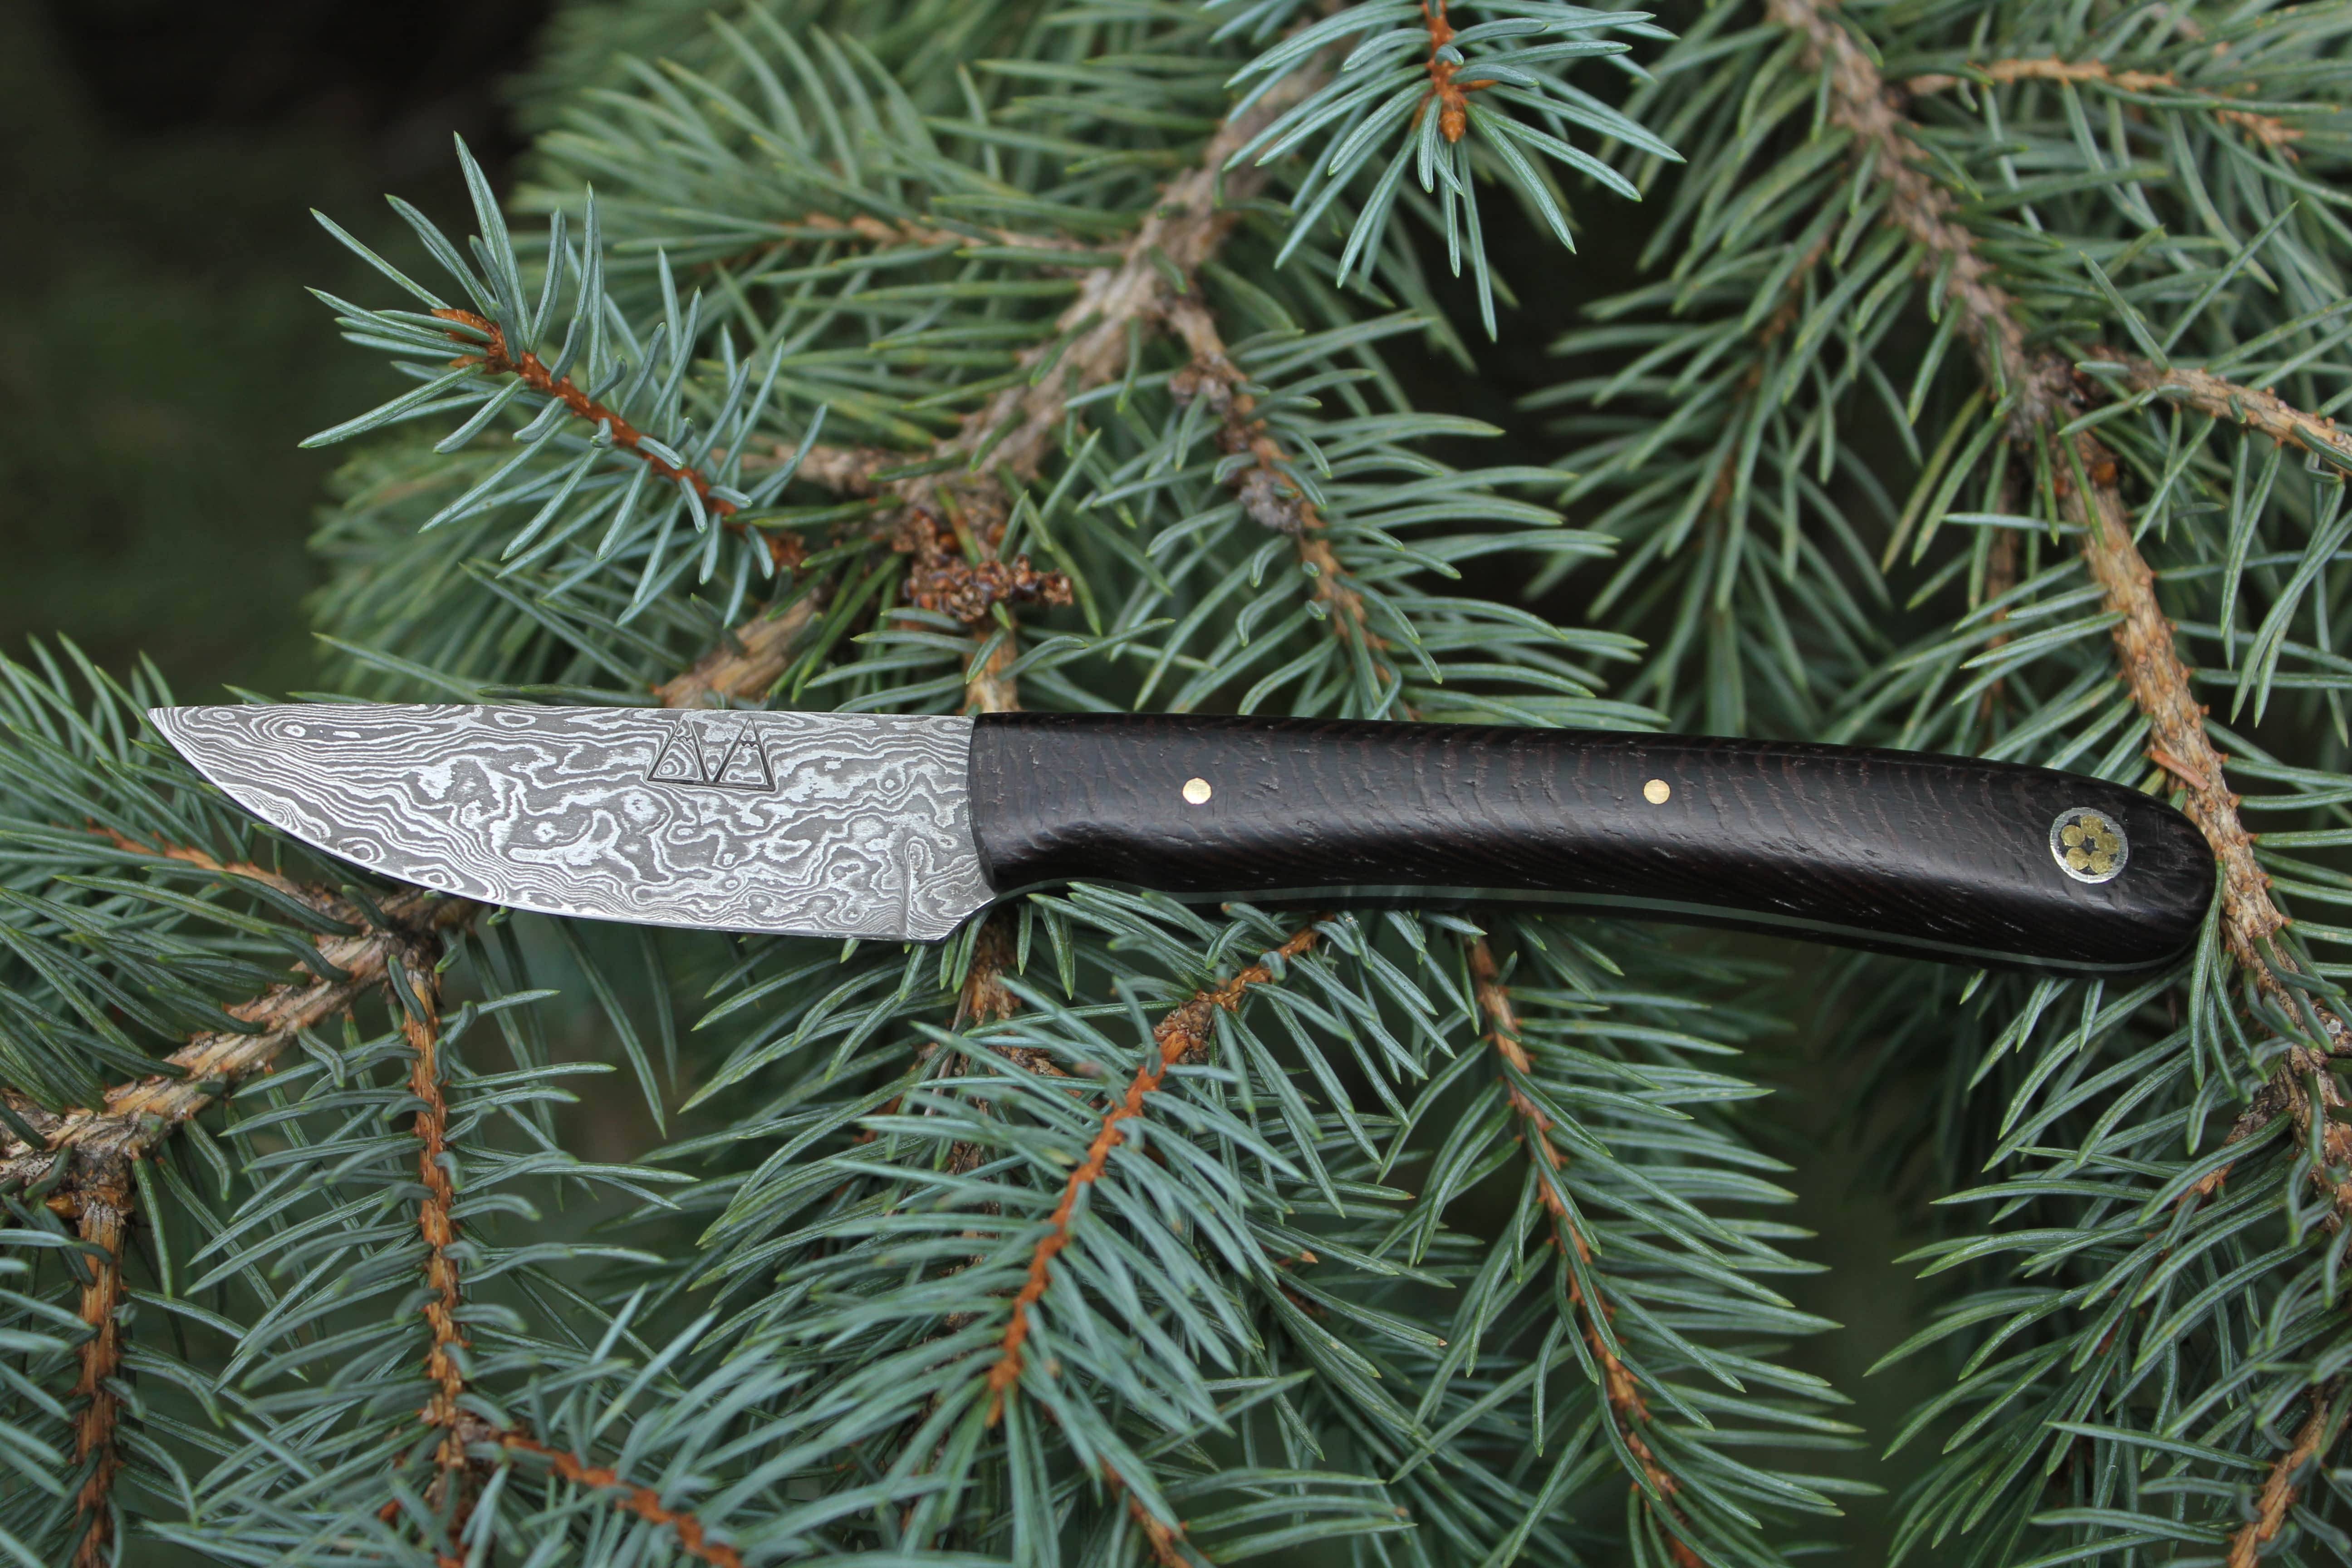 A 160-layer Damascus steel Malachite with a Wenge handle.